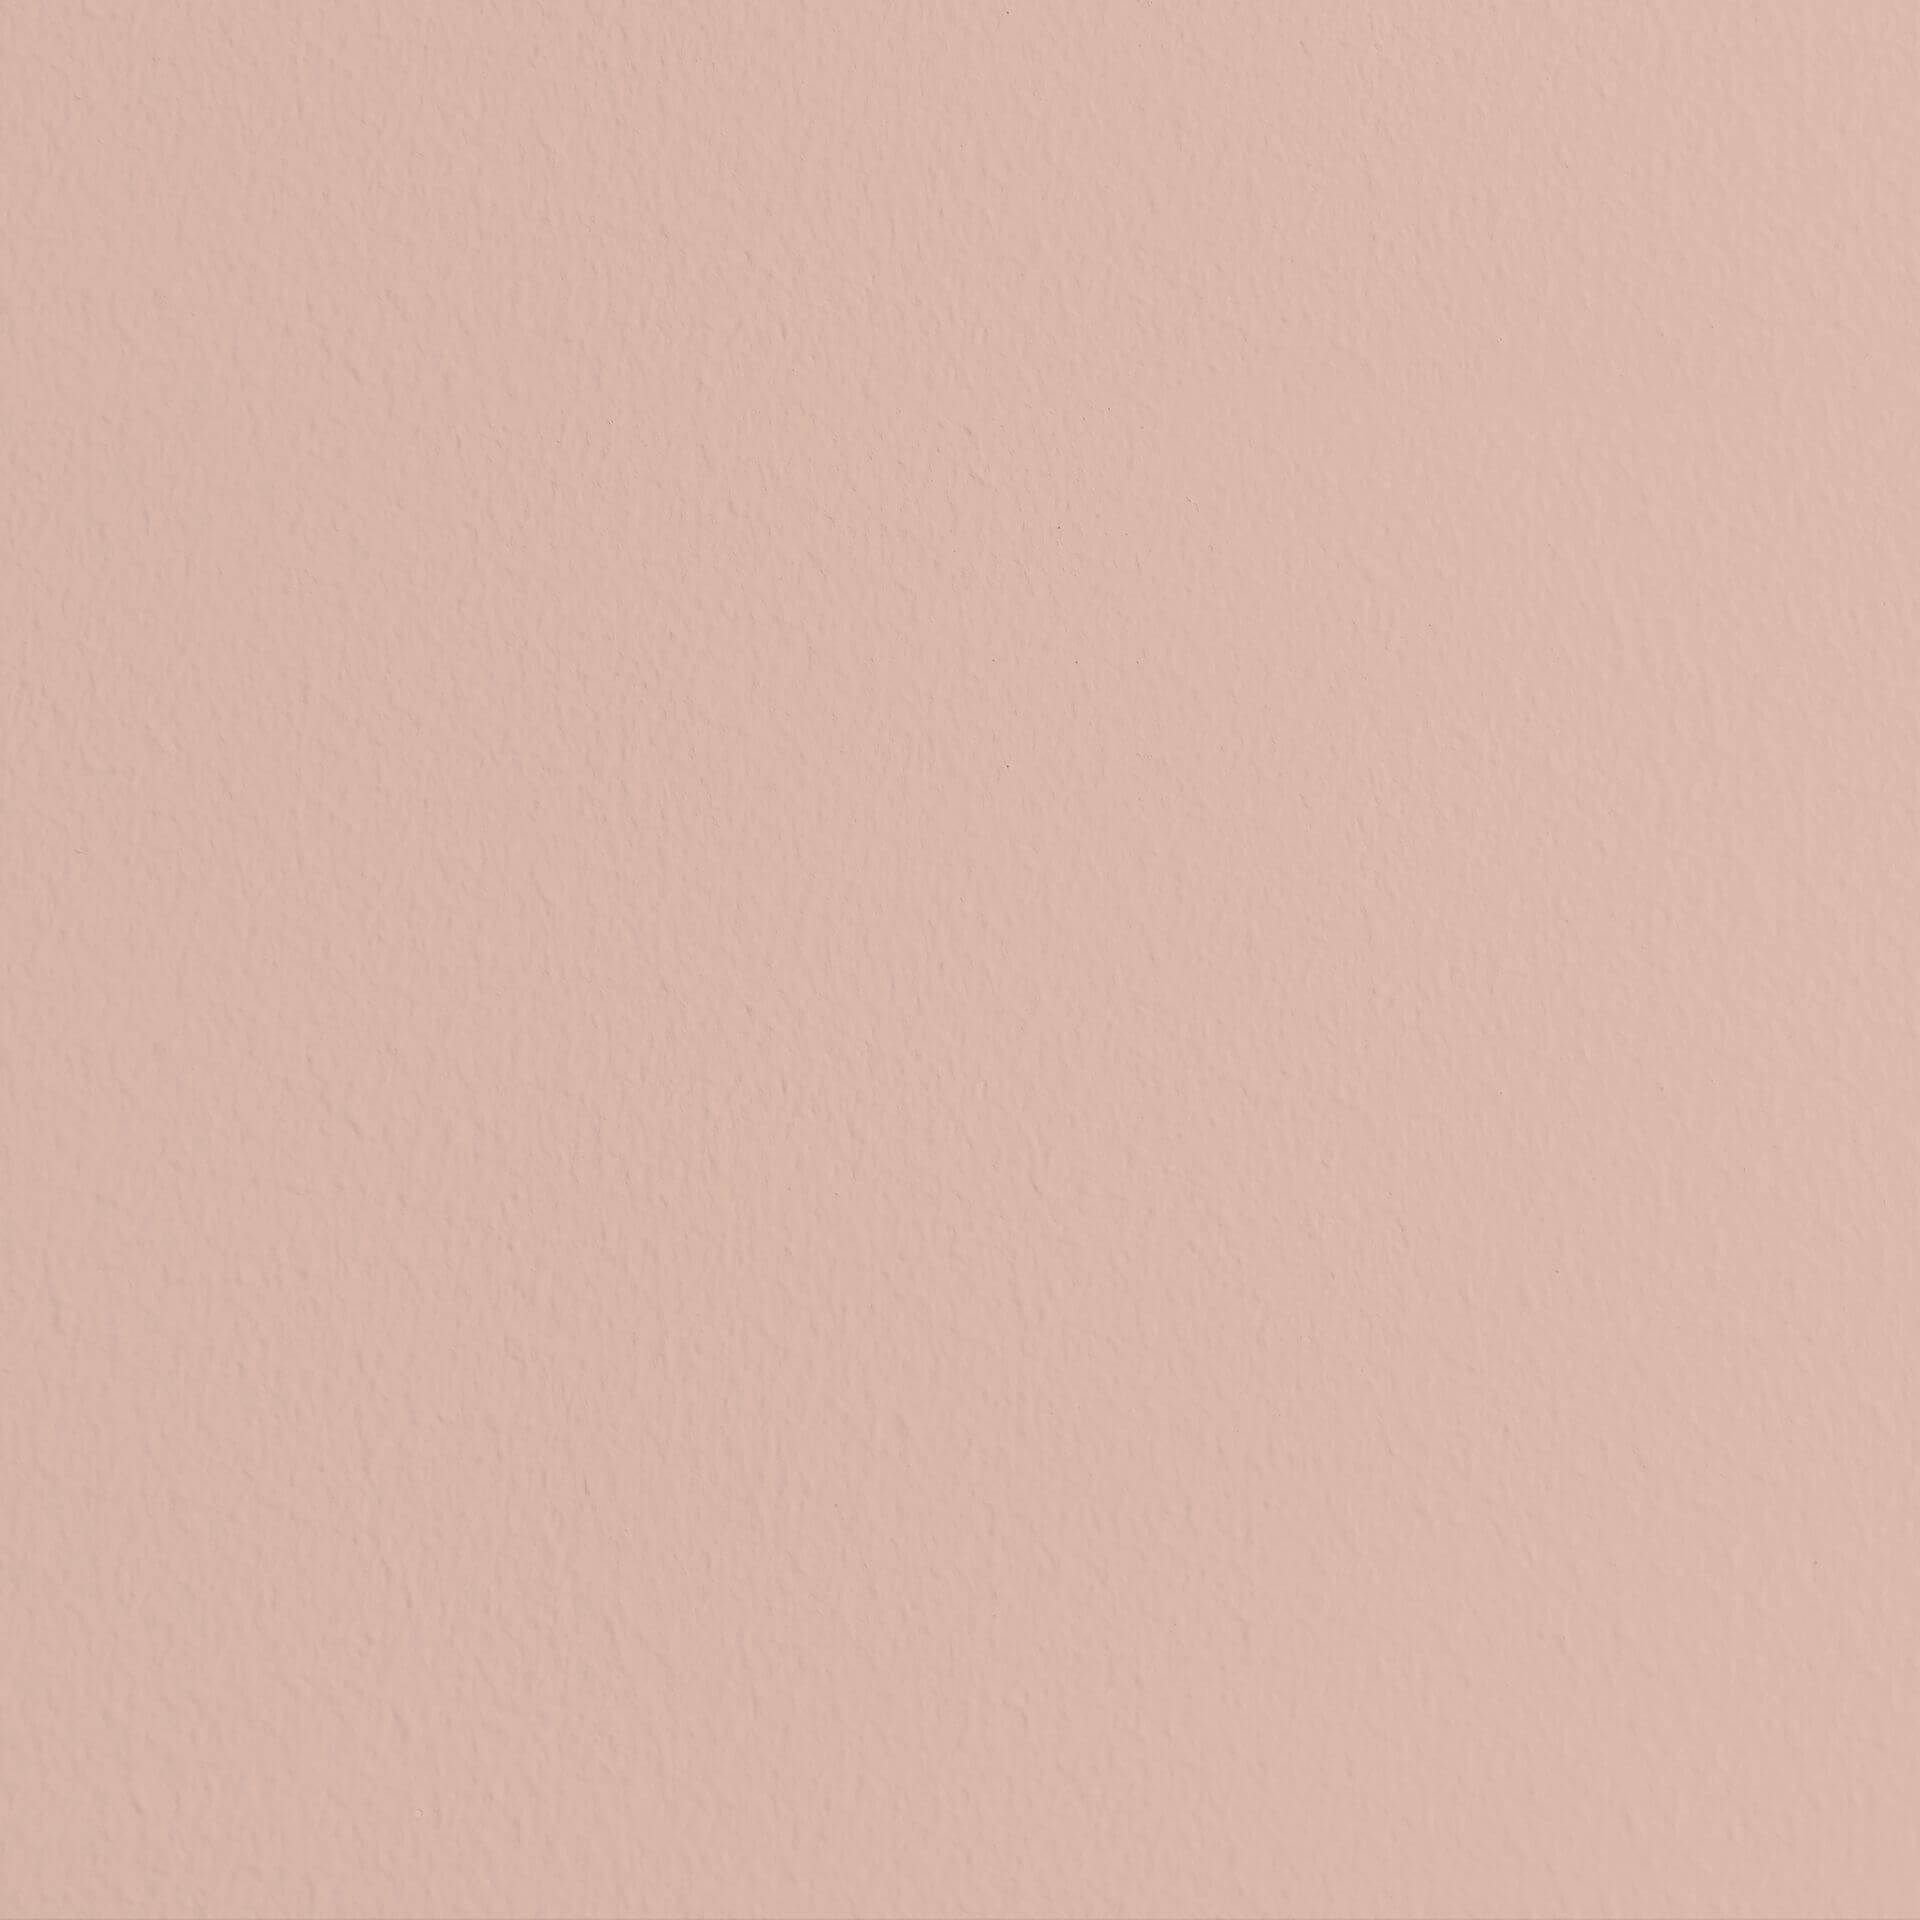 MissPompadour Rose with Marshmallow - The Valuable Wall Paint 1L